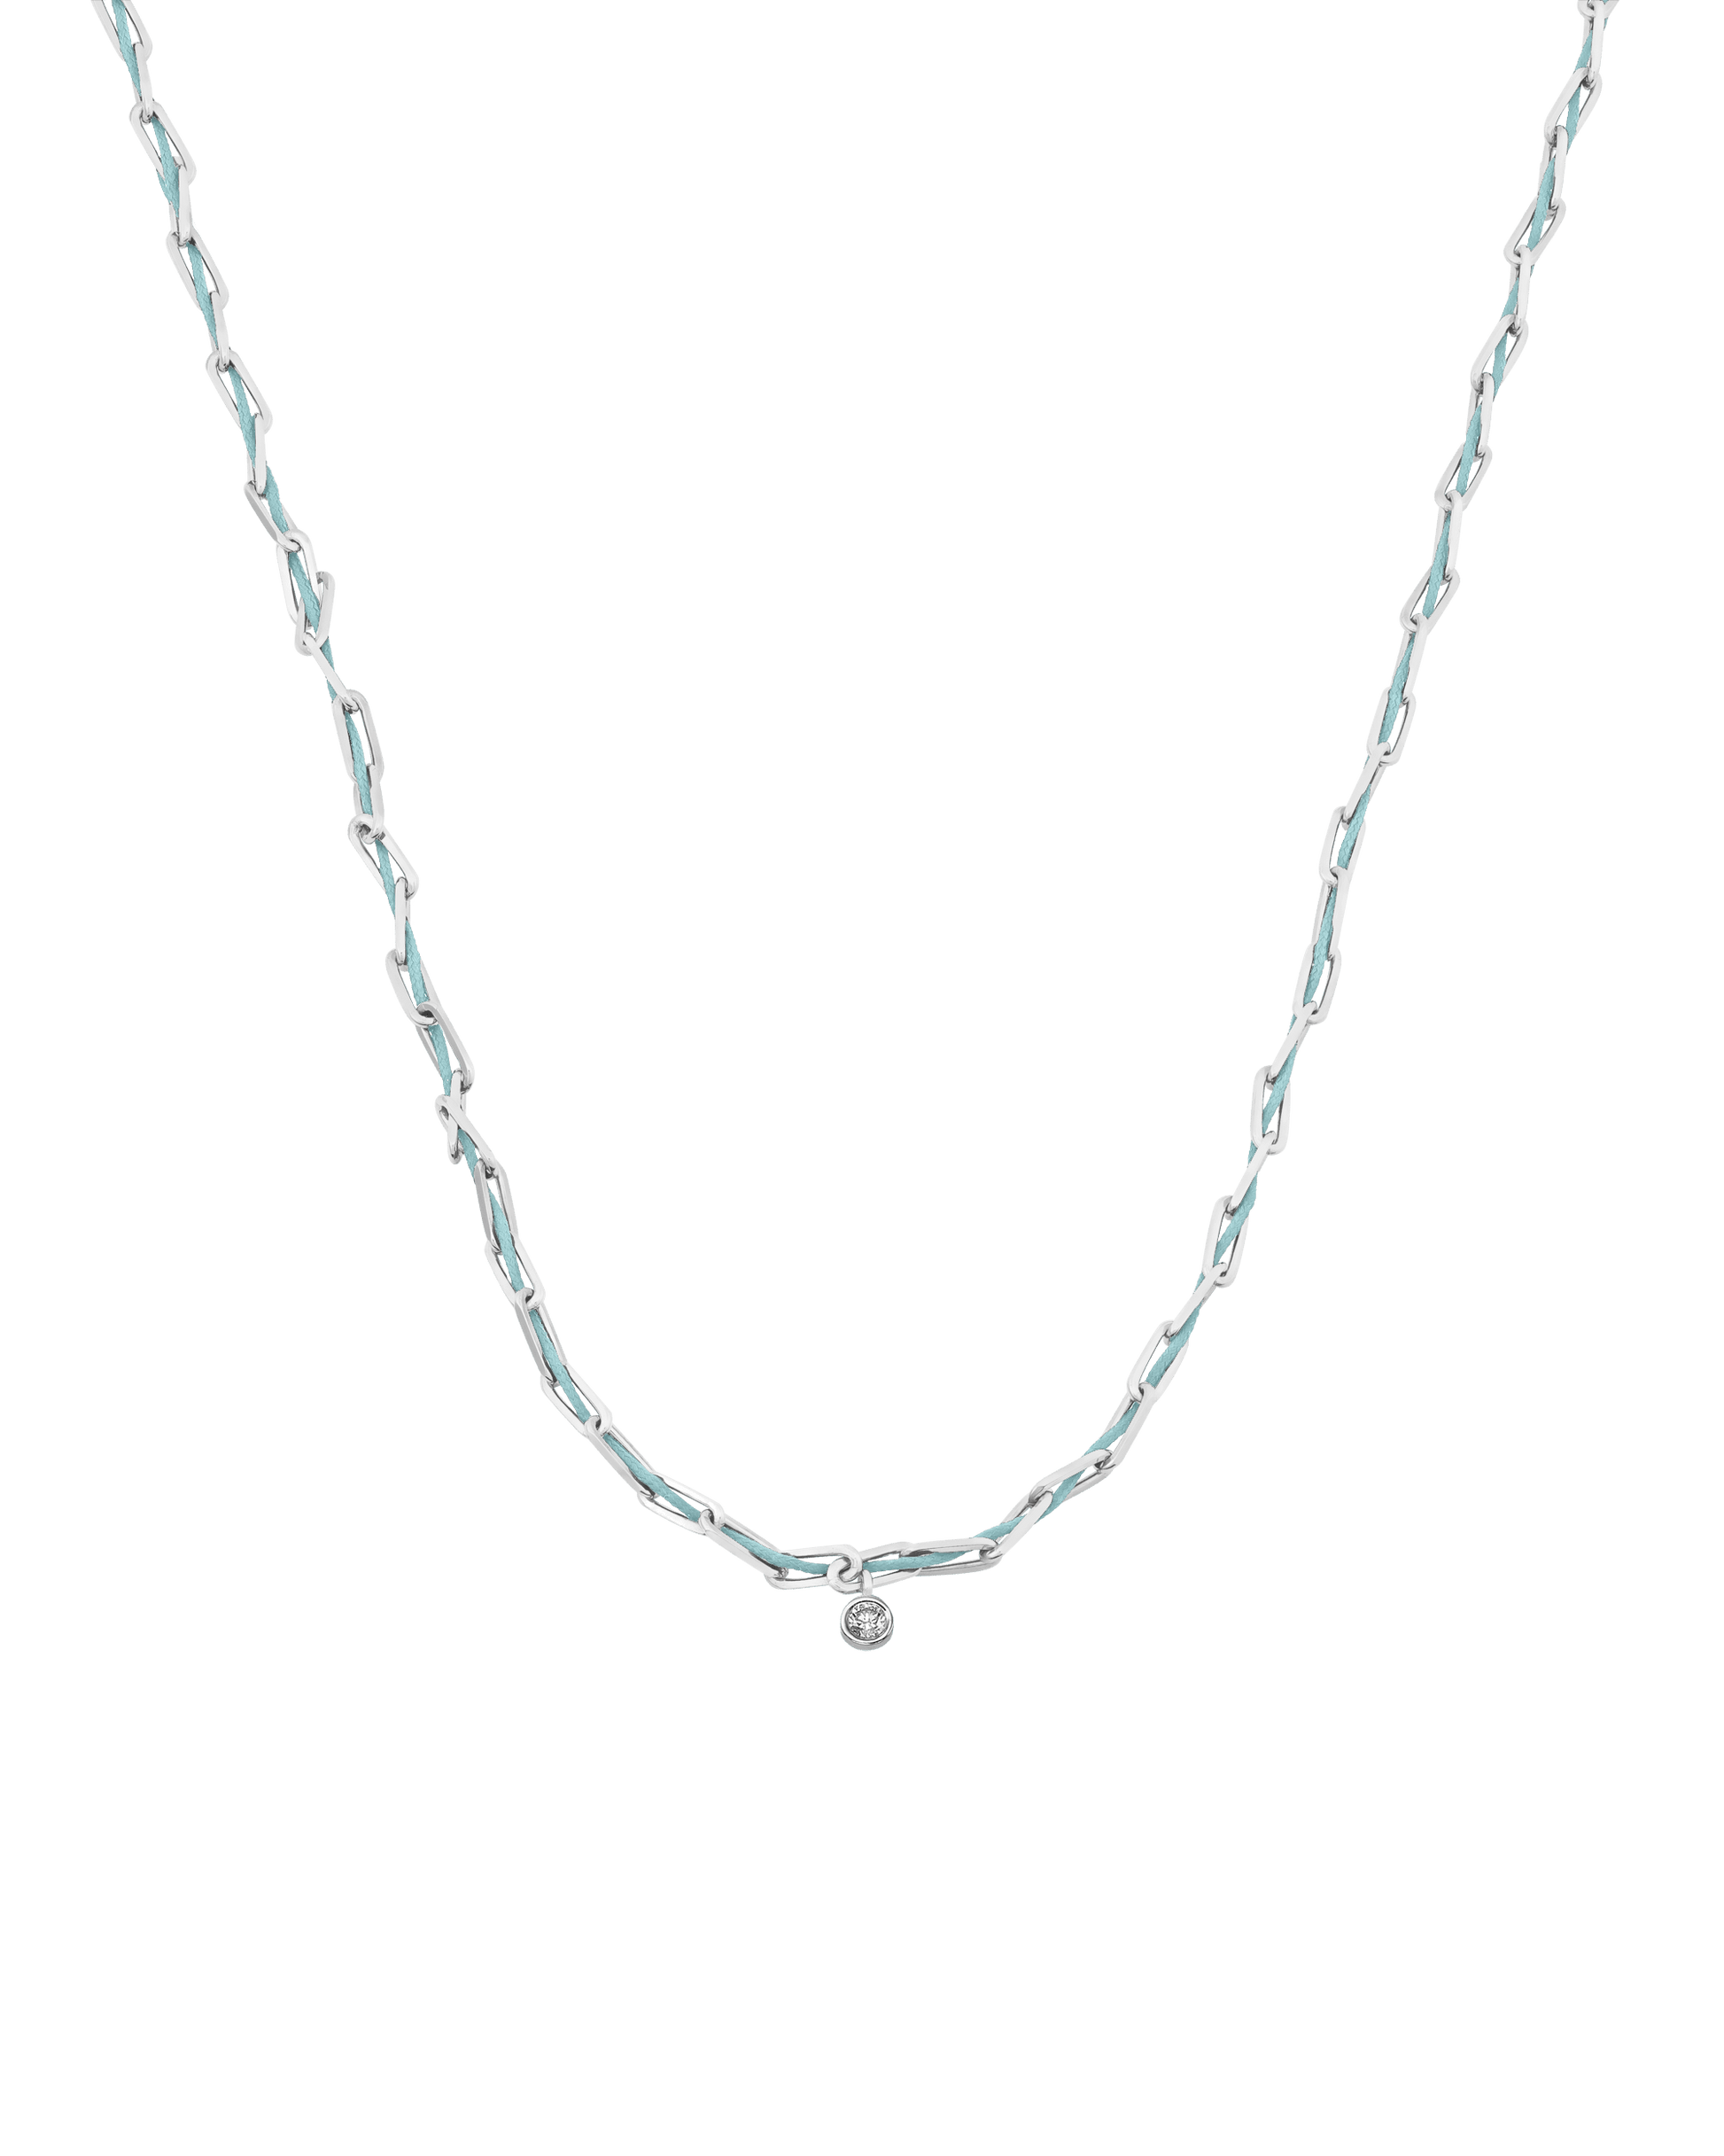 Twine Diamond Necklace - 925 Sterling Silver Necklaces magal-dev Turquoise Large: 0.10ct 16"